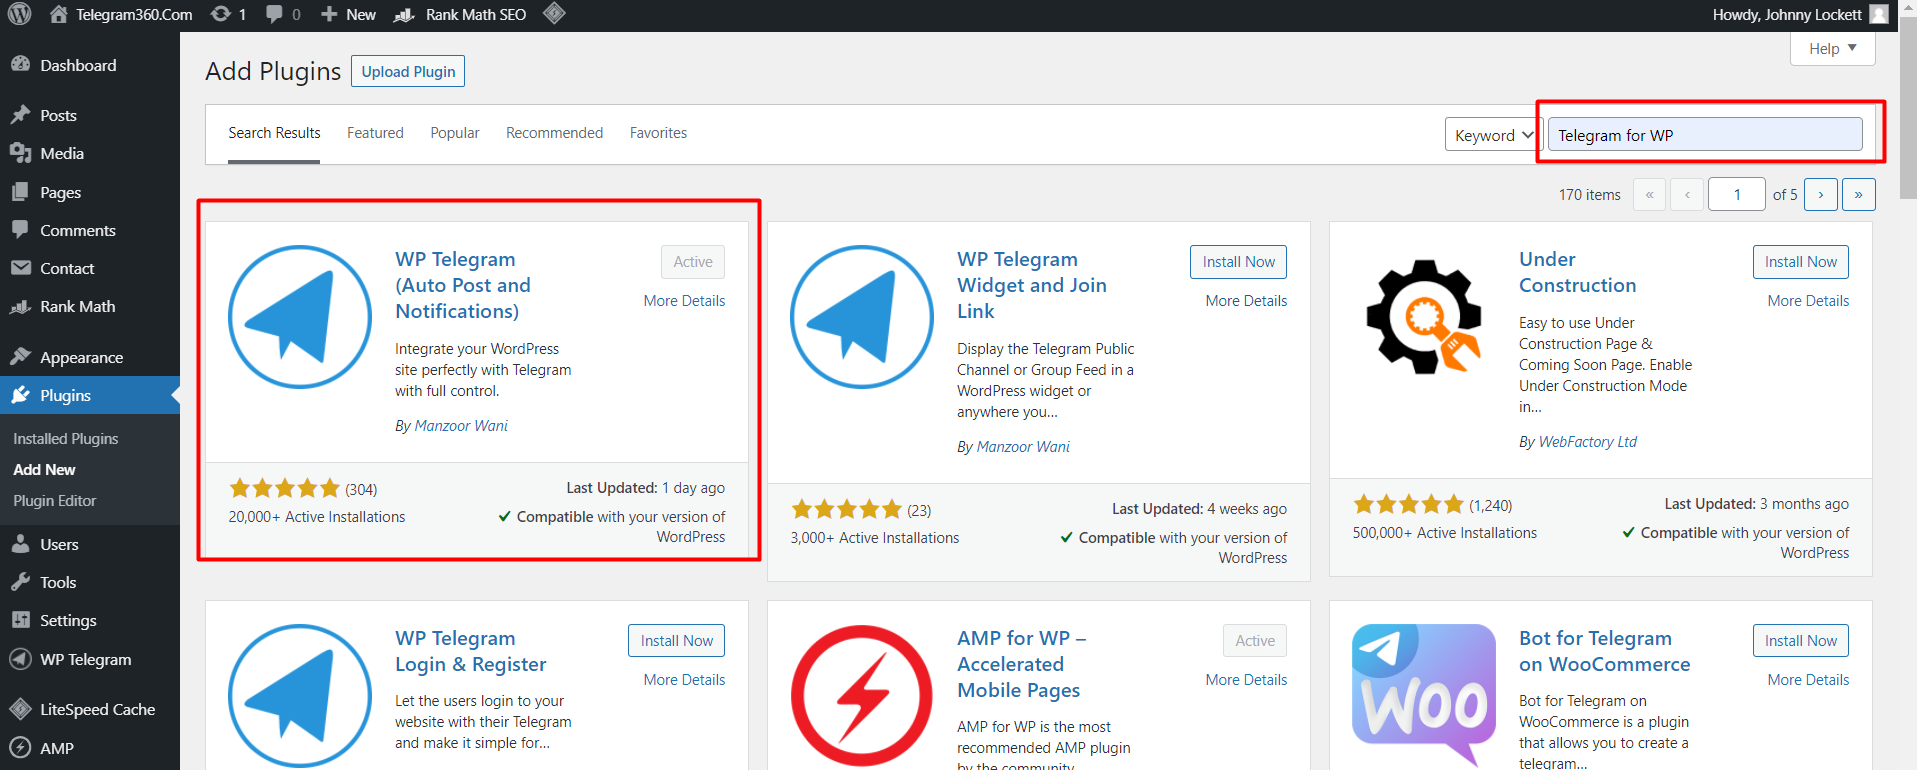 Install The WP Plugin to Your WordPress